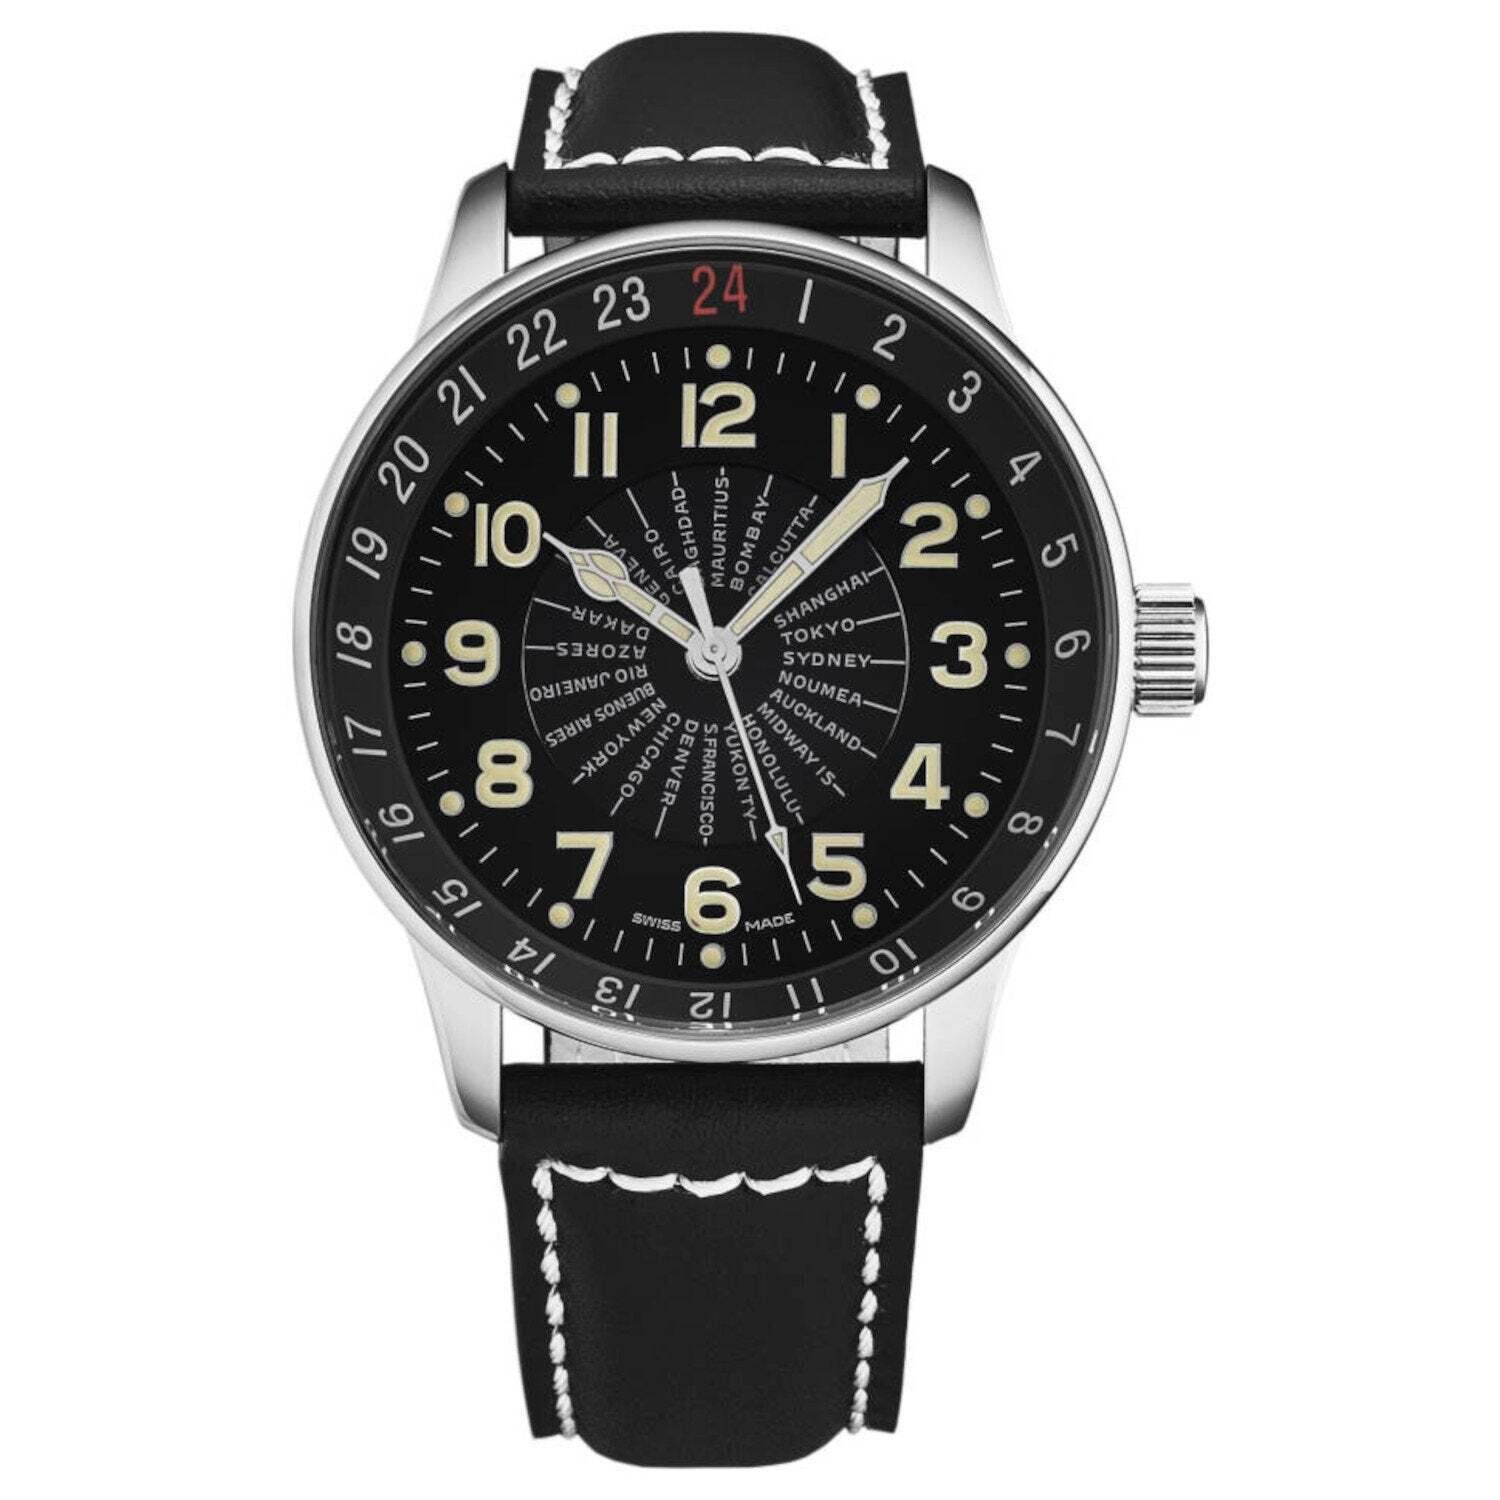 Zeno P554WT-A1 Men's 'Pilot' X-Large world timer Limited Edition Black Dial Black/White Leather Strap Automatic Watch